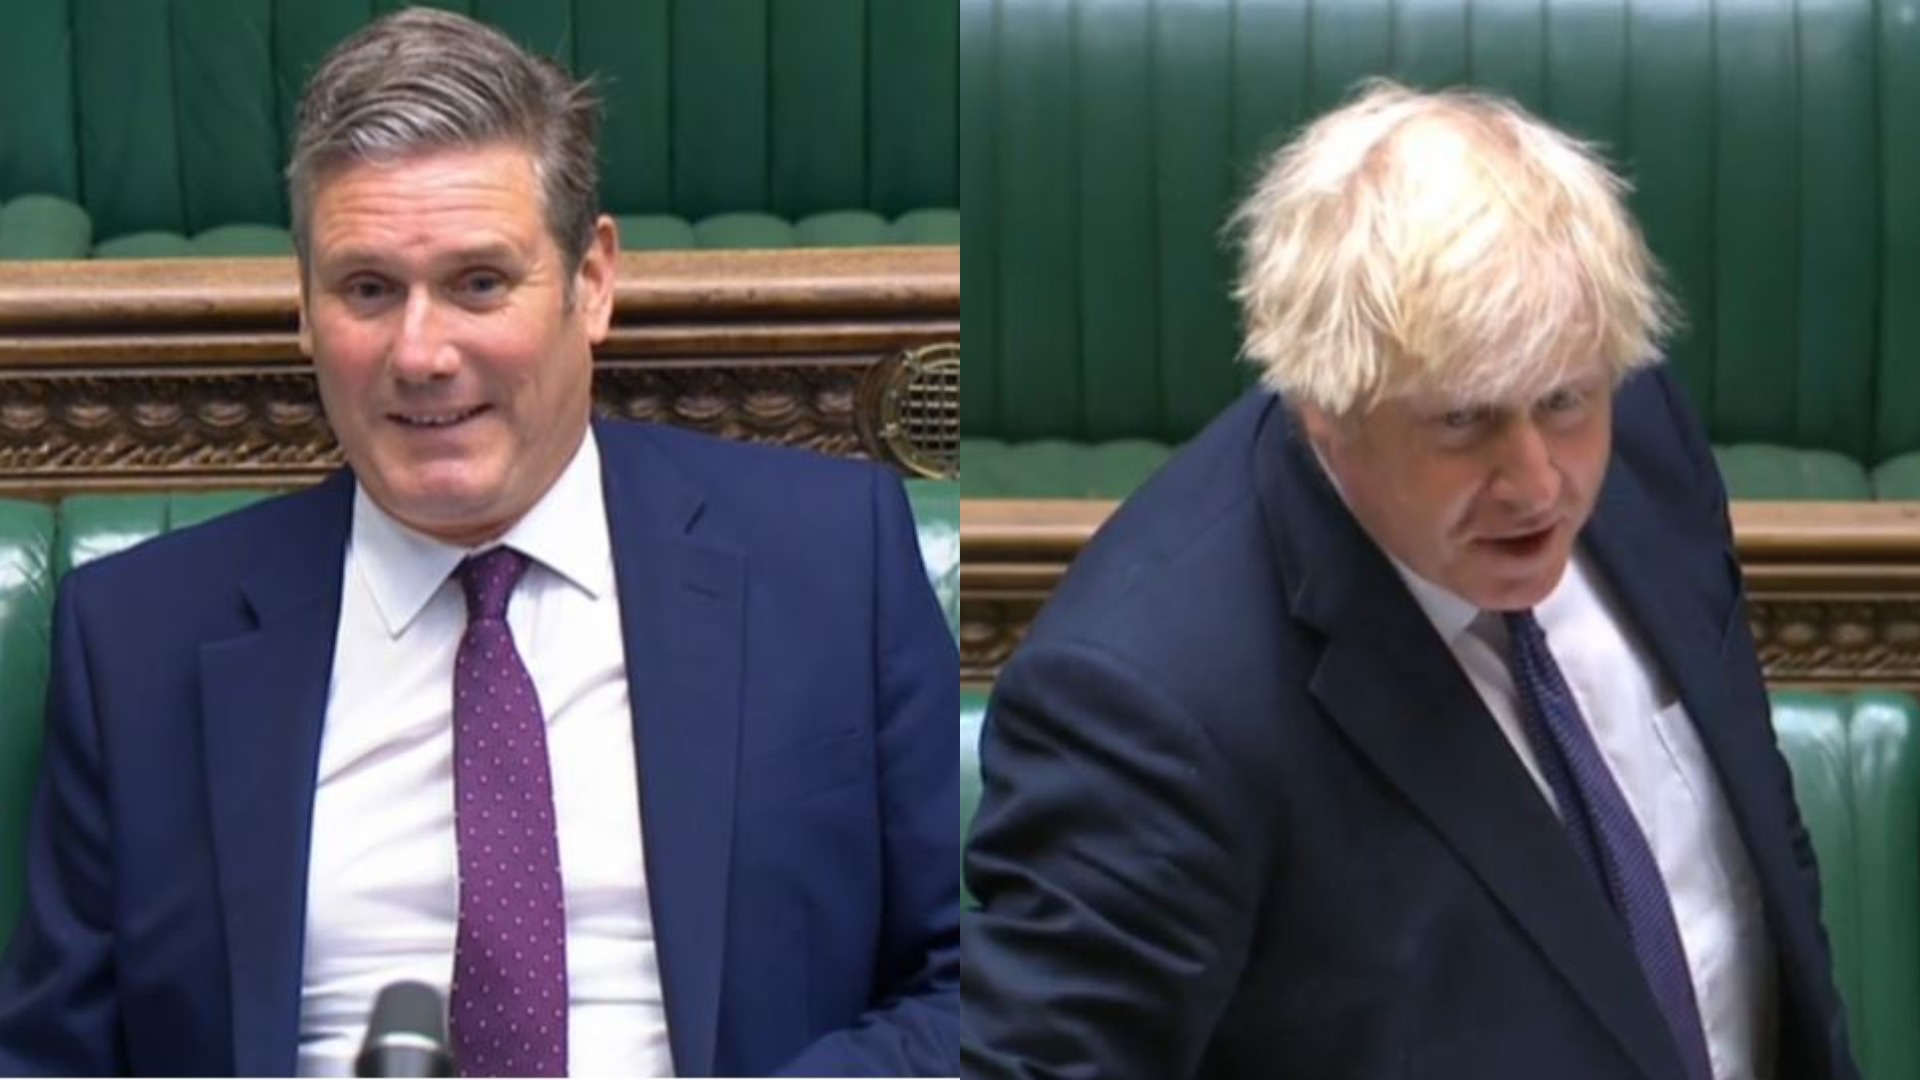 Starmer seemed impressive in his early exchanges with the PM.